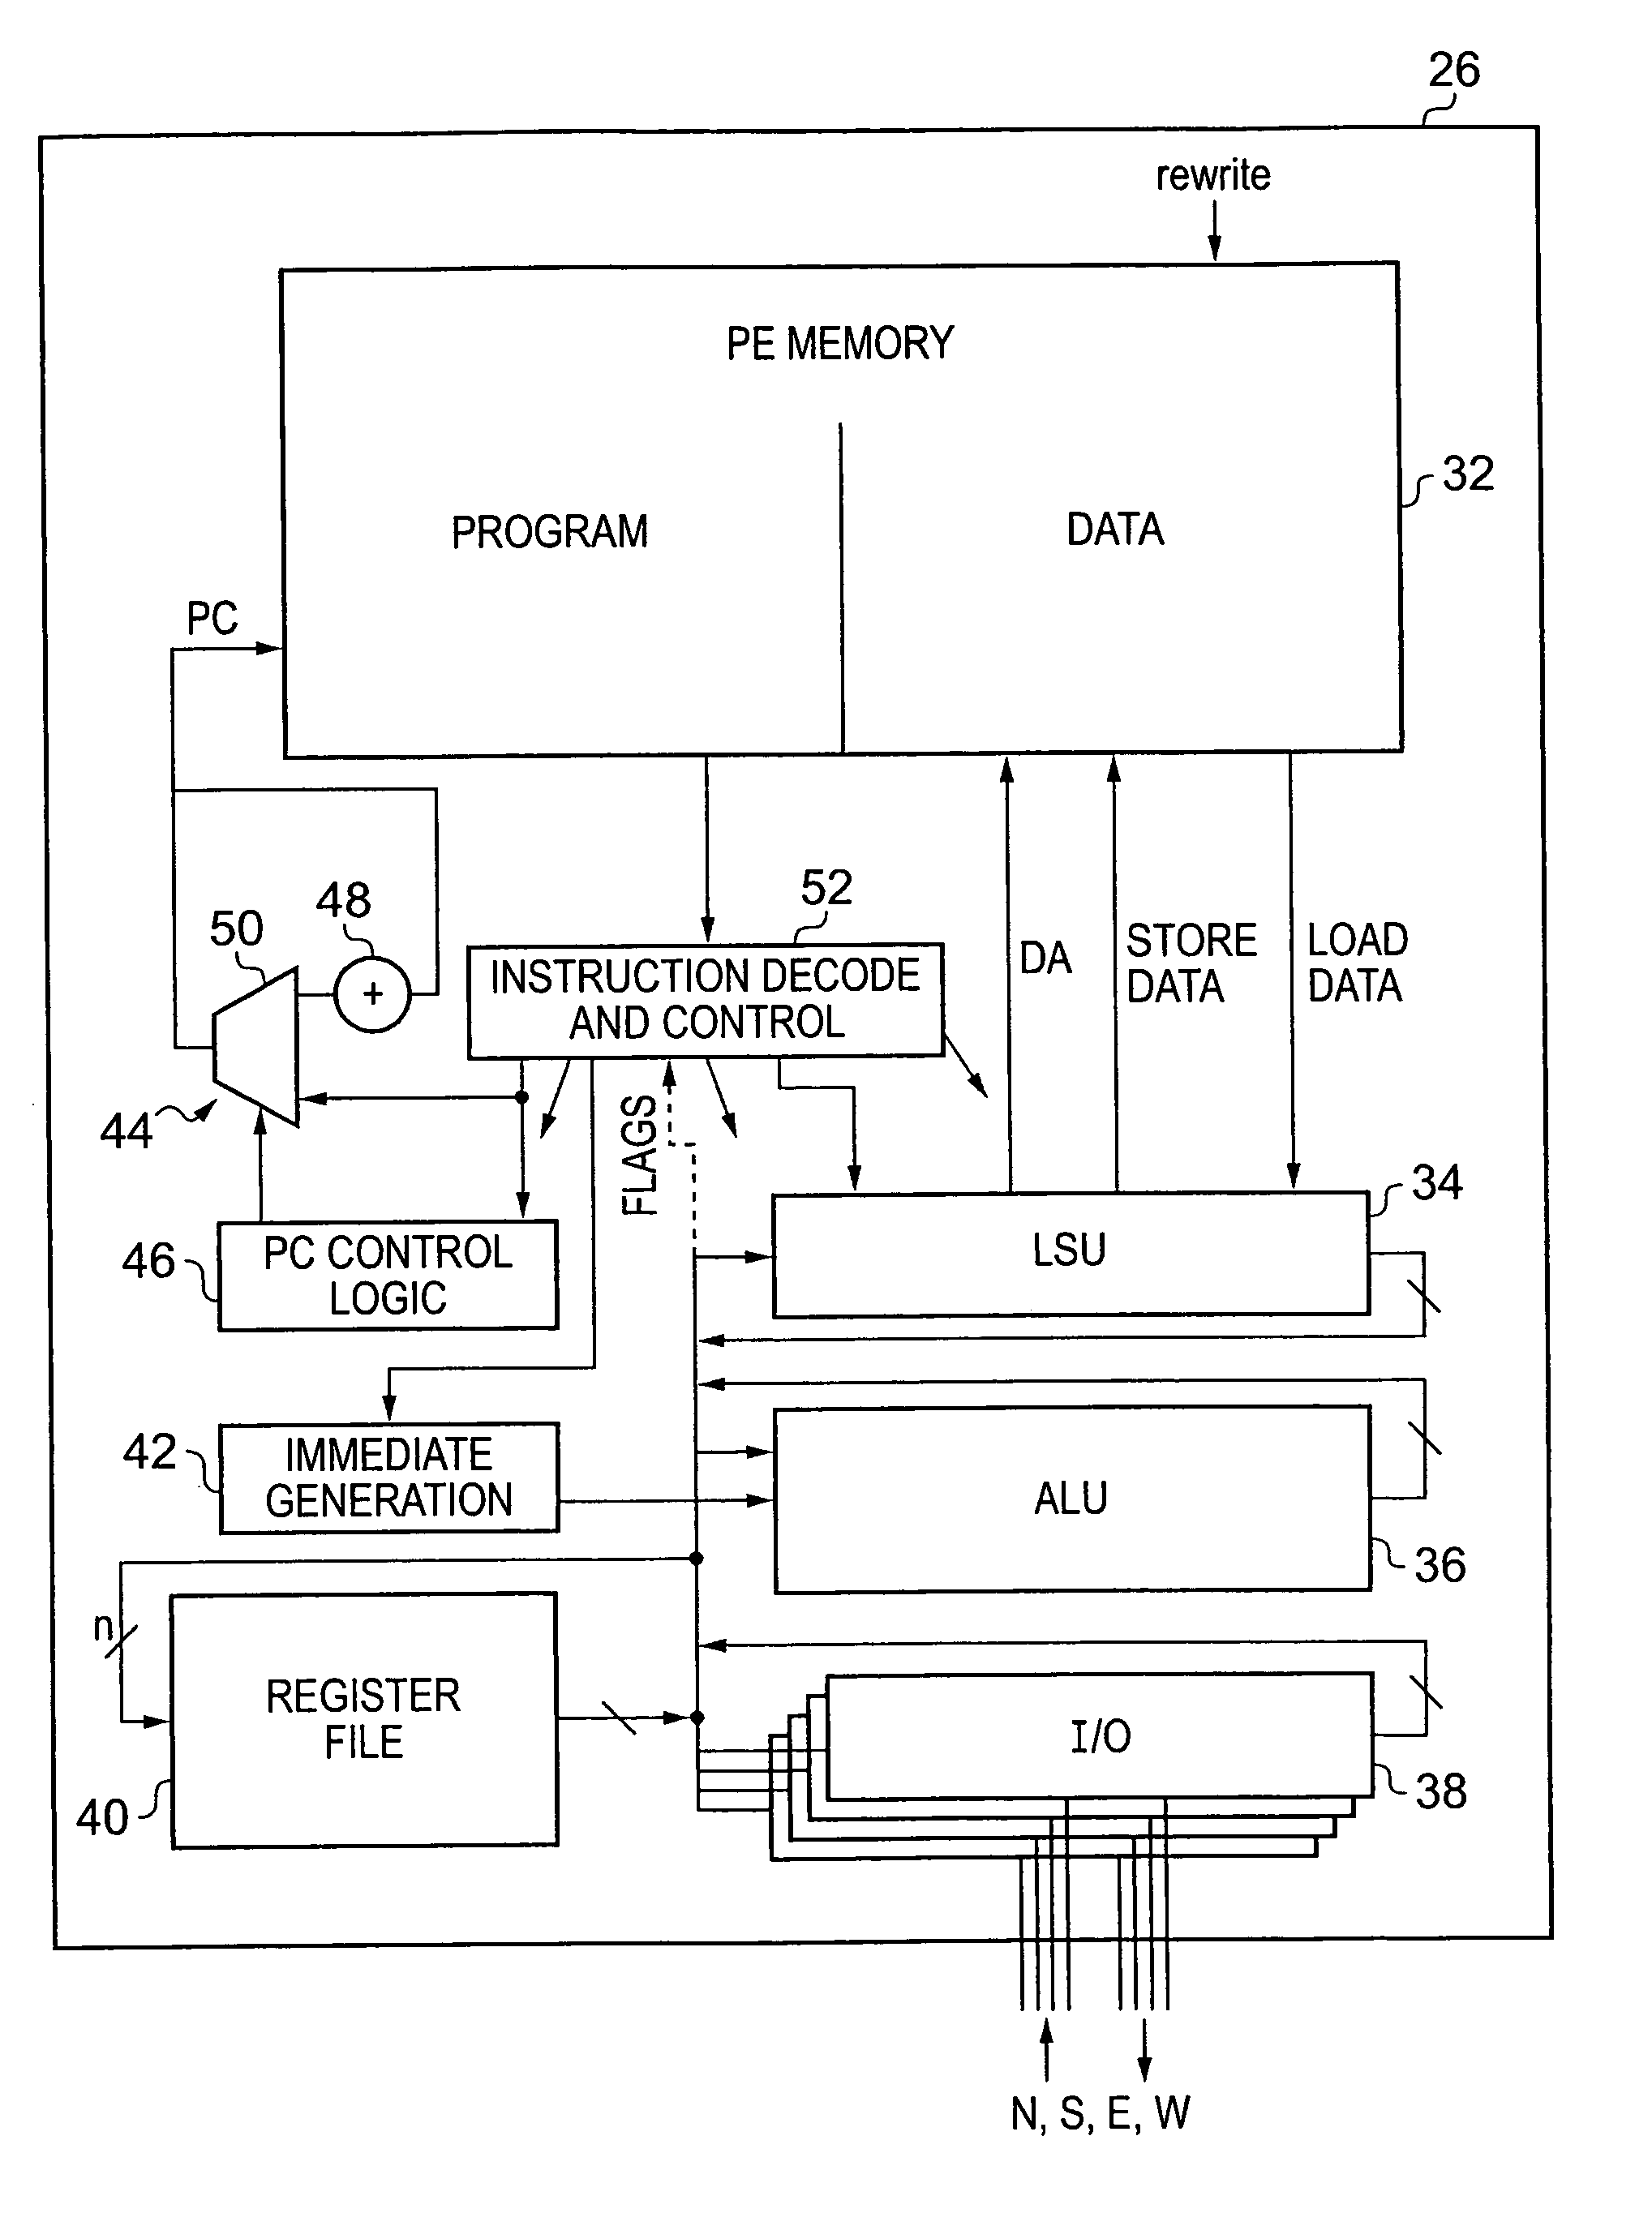 Integrated circuit incorporating an array of interconnected processors executing a cycle-based program